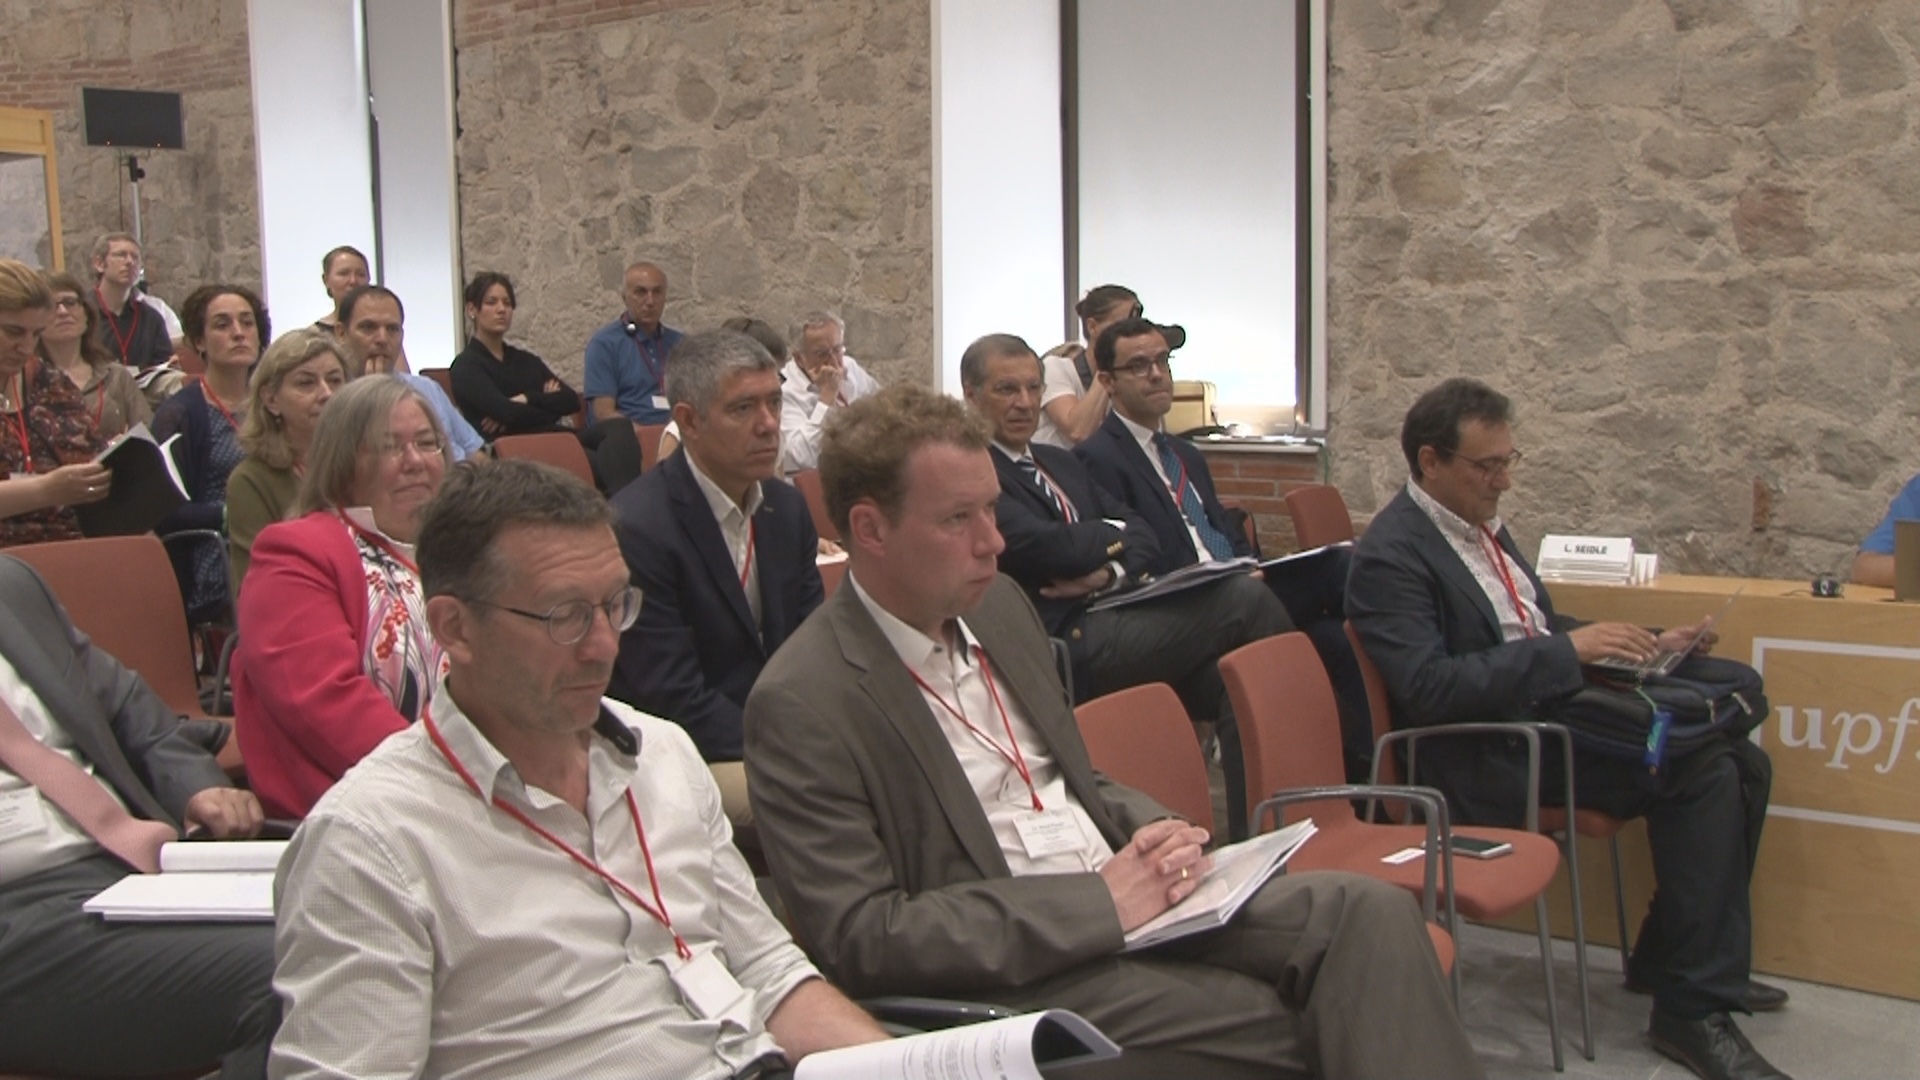 International experts shared their experiences in a conference in Barcelona